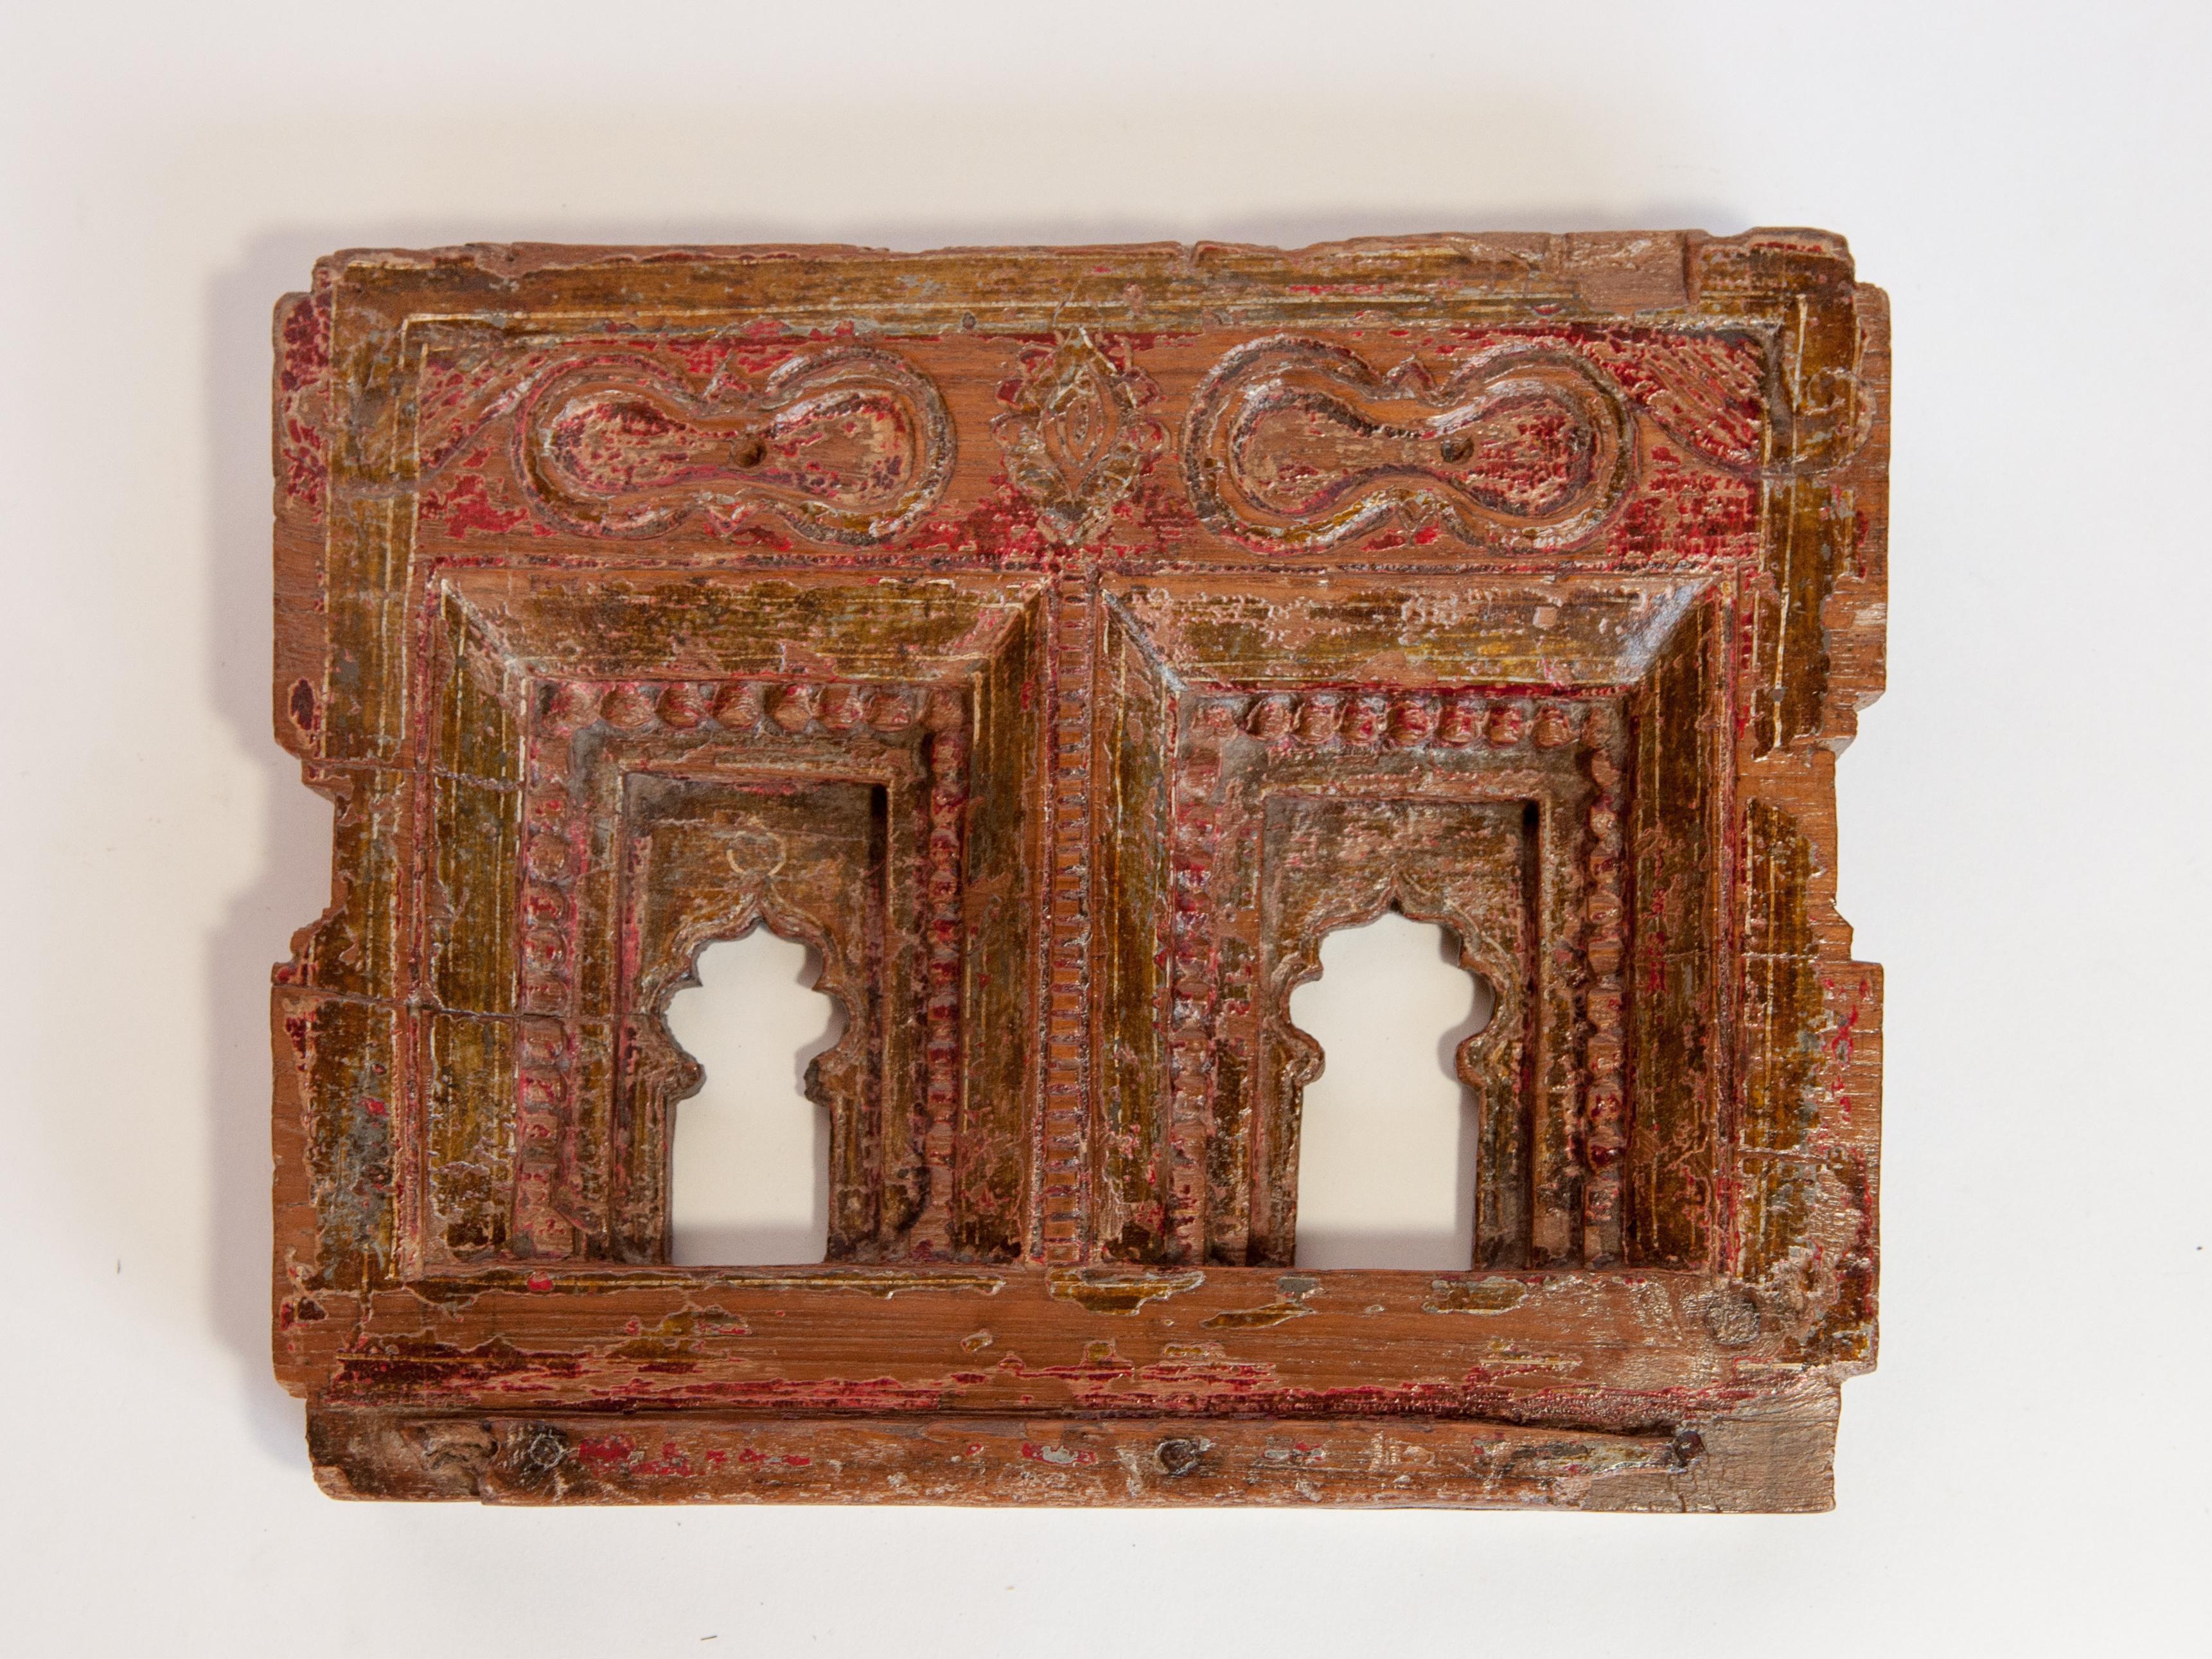 Hand-Carved Vintage Carved Wooden Picture Frame, Mid-20th Century, India